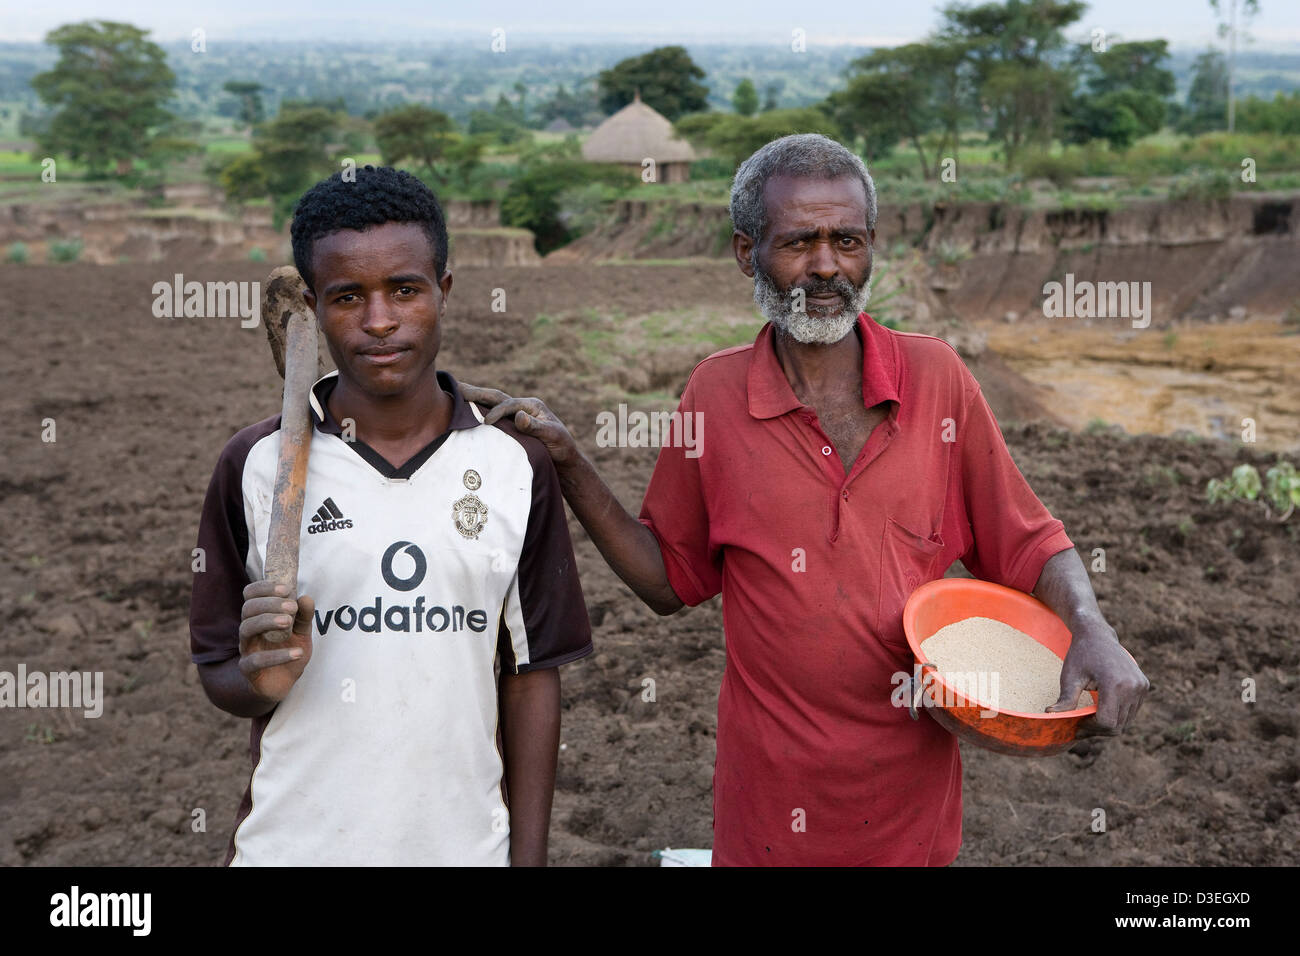 JAFFA VILLAGE, WOLAYITA ZONE, ETHIOPIA, 19TH AUGUST 2008: Farmer sows tef crop on his badly eroded field Stock Photo